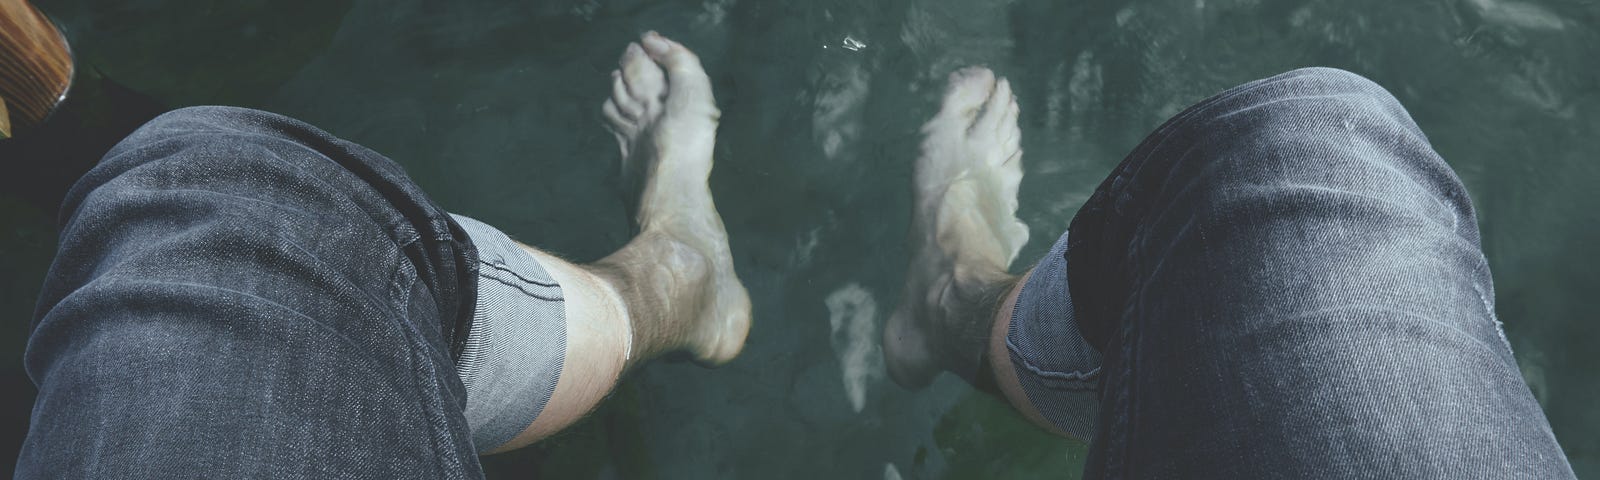 Legs in cuffed jeans sitting on the edge of a wood dock with bare feet in the water below.